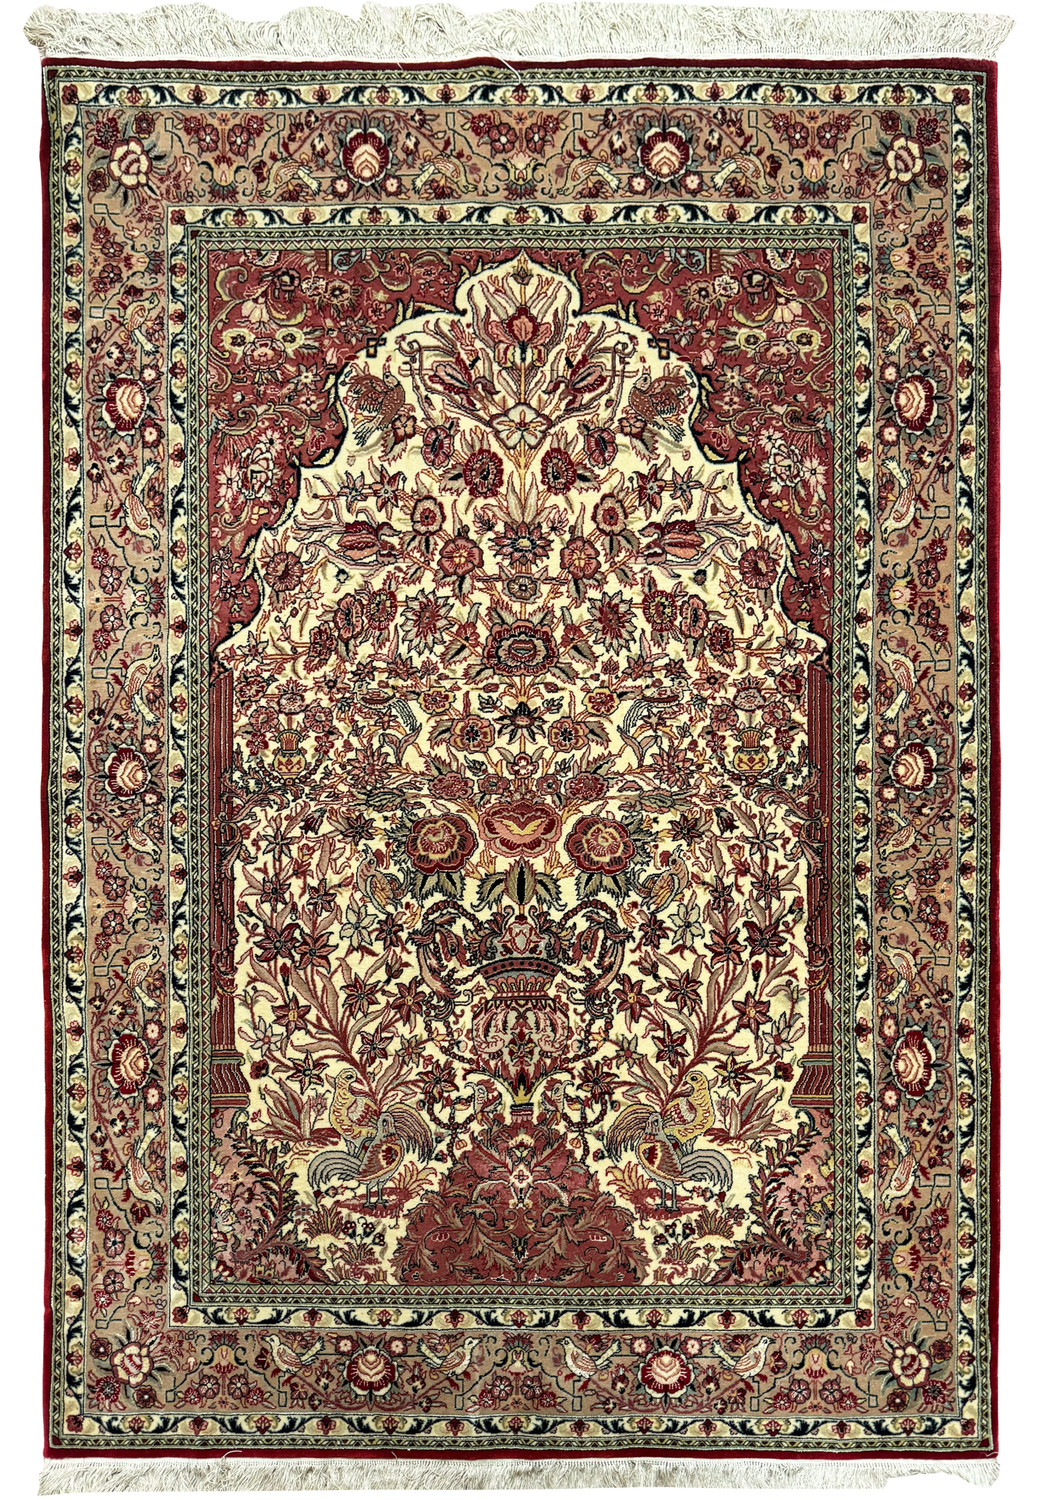 Full view of a 4'4" x 7' Persian Qum rug laid out flat, showcasing the intricate floral medallion design in the center with a detailed border, in a color palette of red, blue, cream, and silk accents.